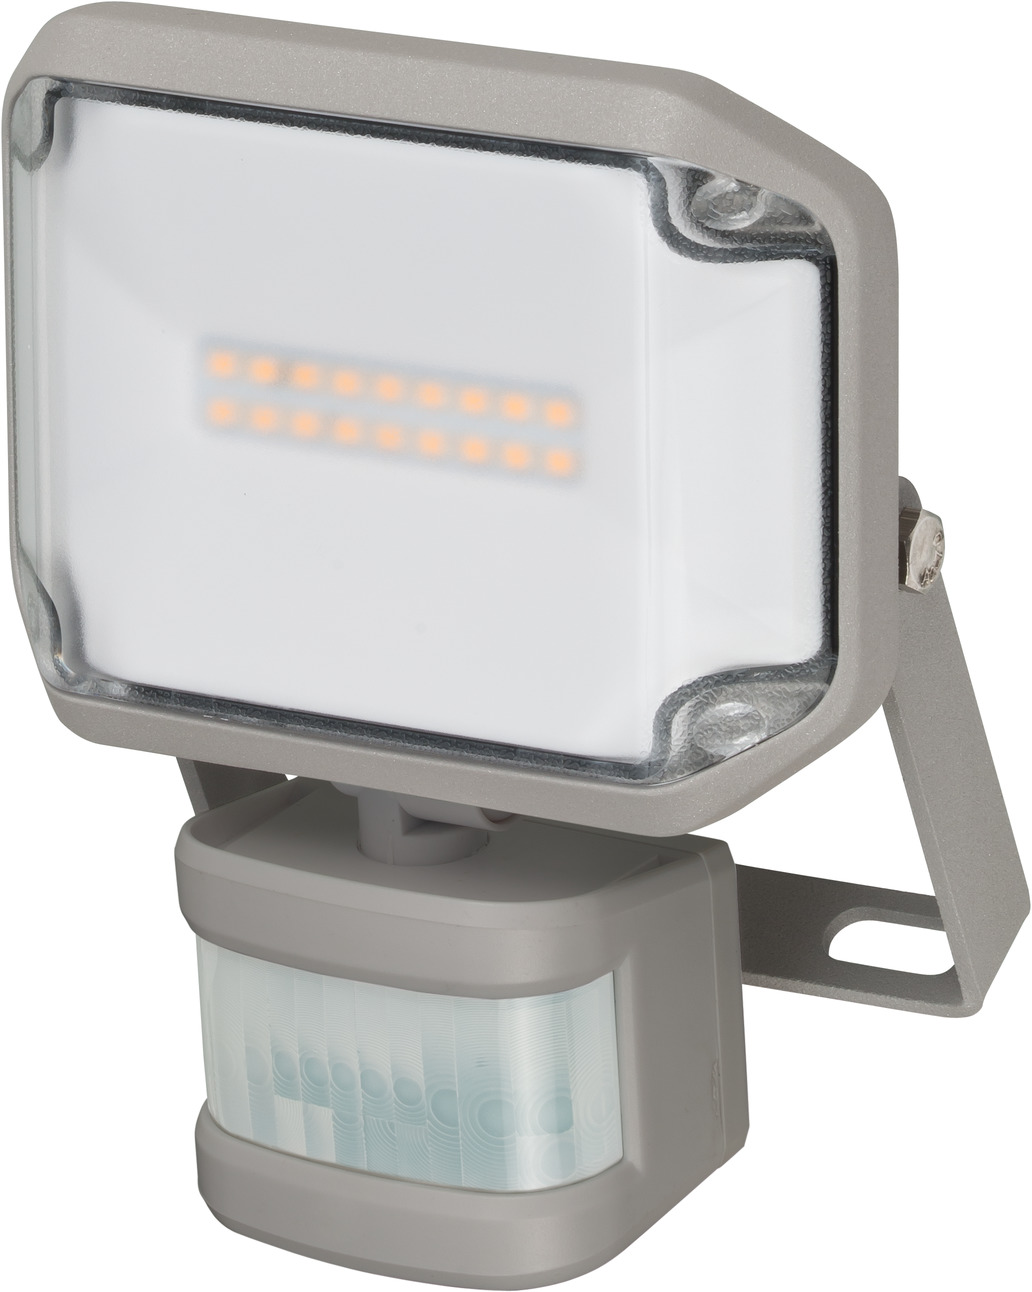 LED spotlights AL 1050 P with infrared motion detector 10W, 1010lm, IP44